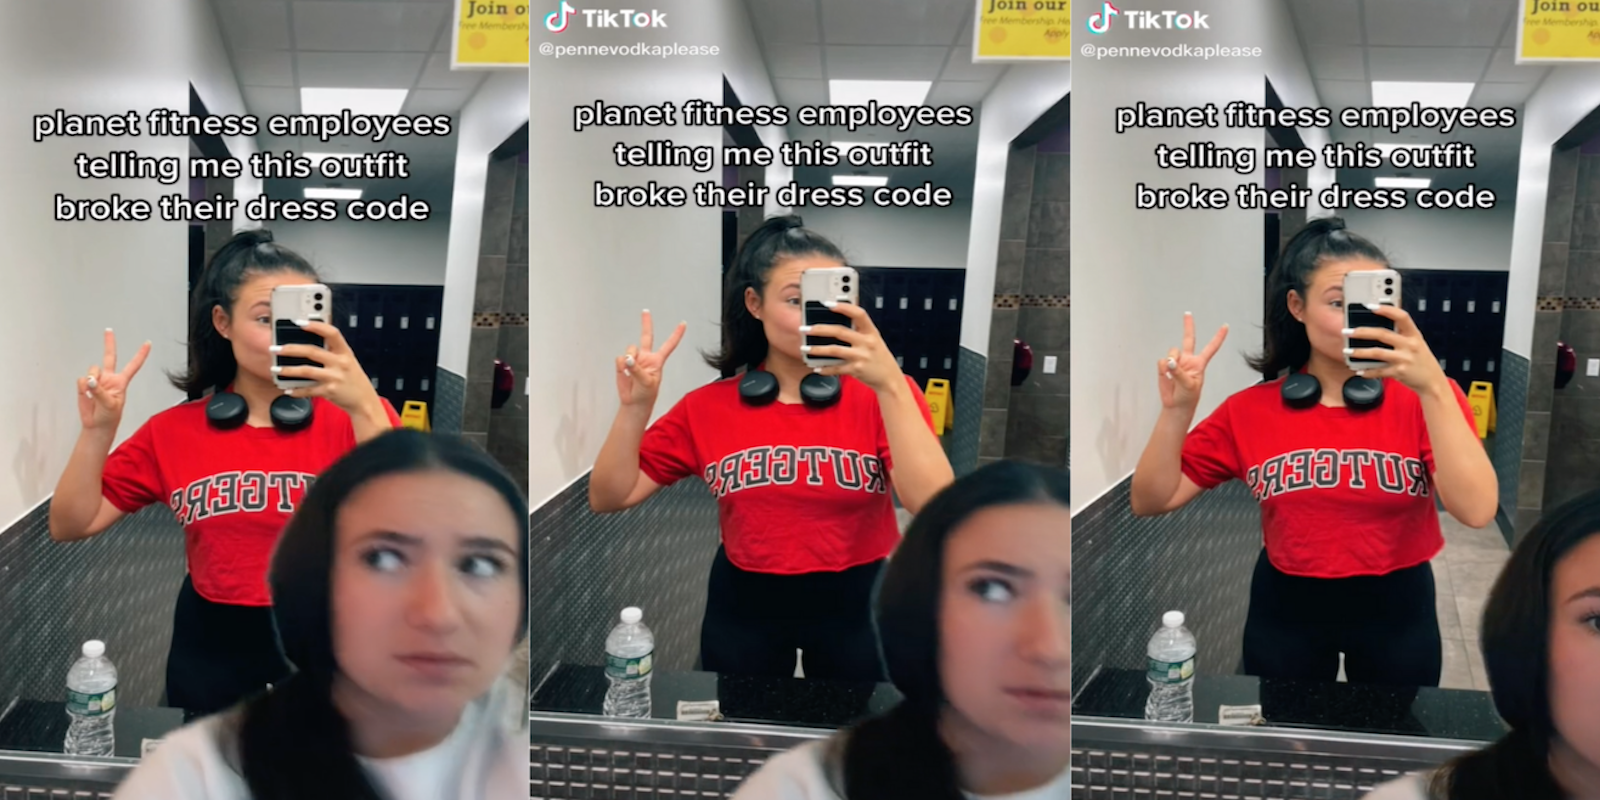 Three panel screenshot from TikTok where a girl claims that her gym outfit of a red Rutgers University crop top and black leggings were against Planet Fitness dress code